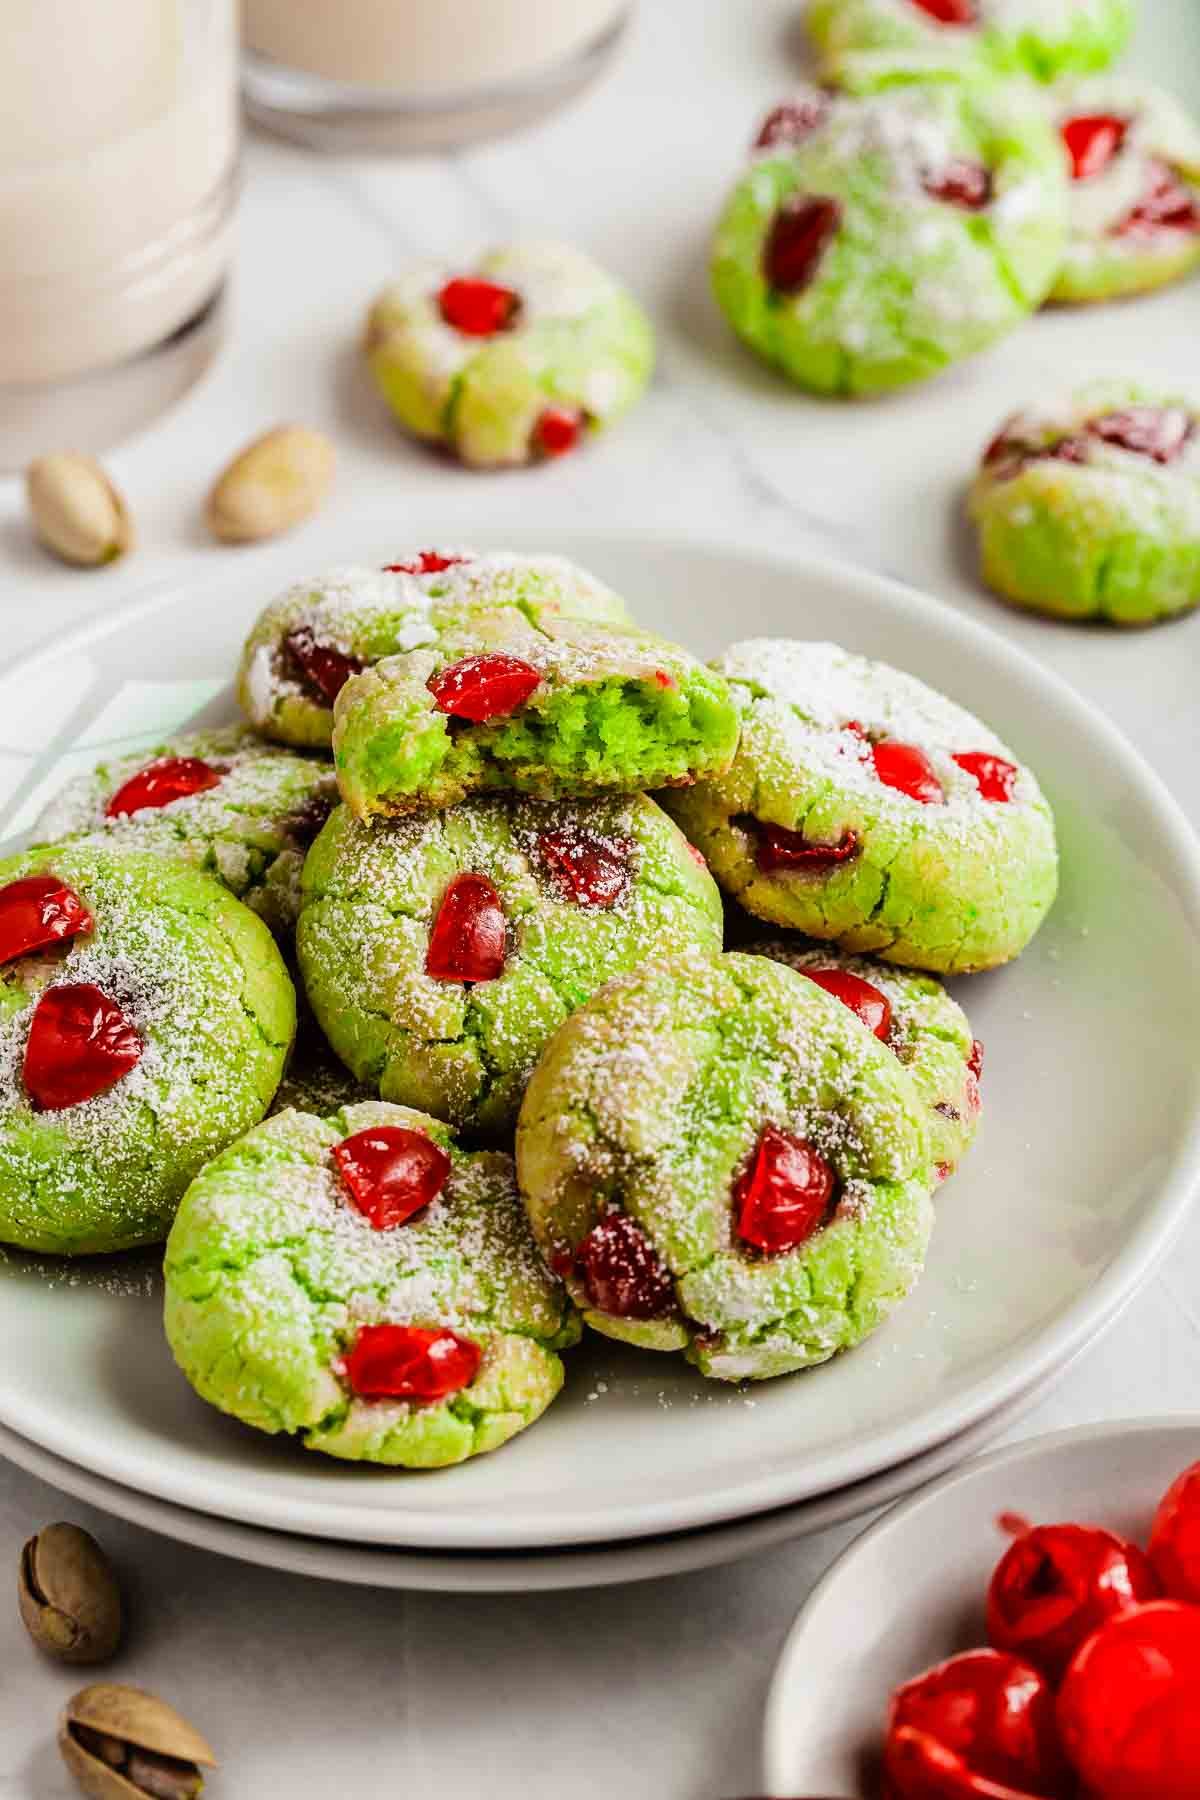 Plate of bright green pistachio pudding cookies with red cherries studded throughout.